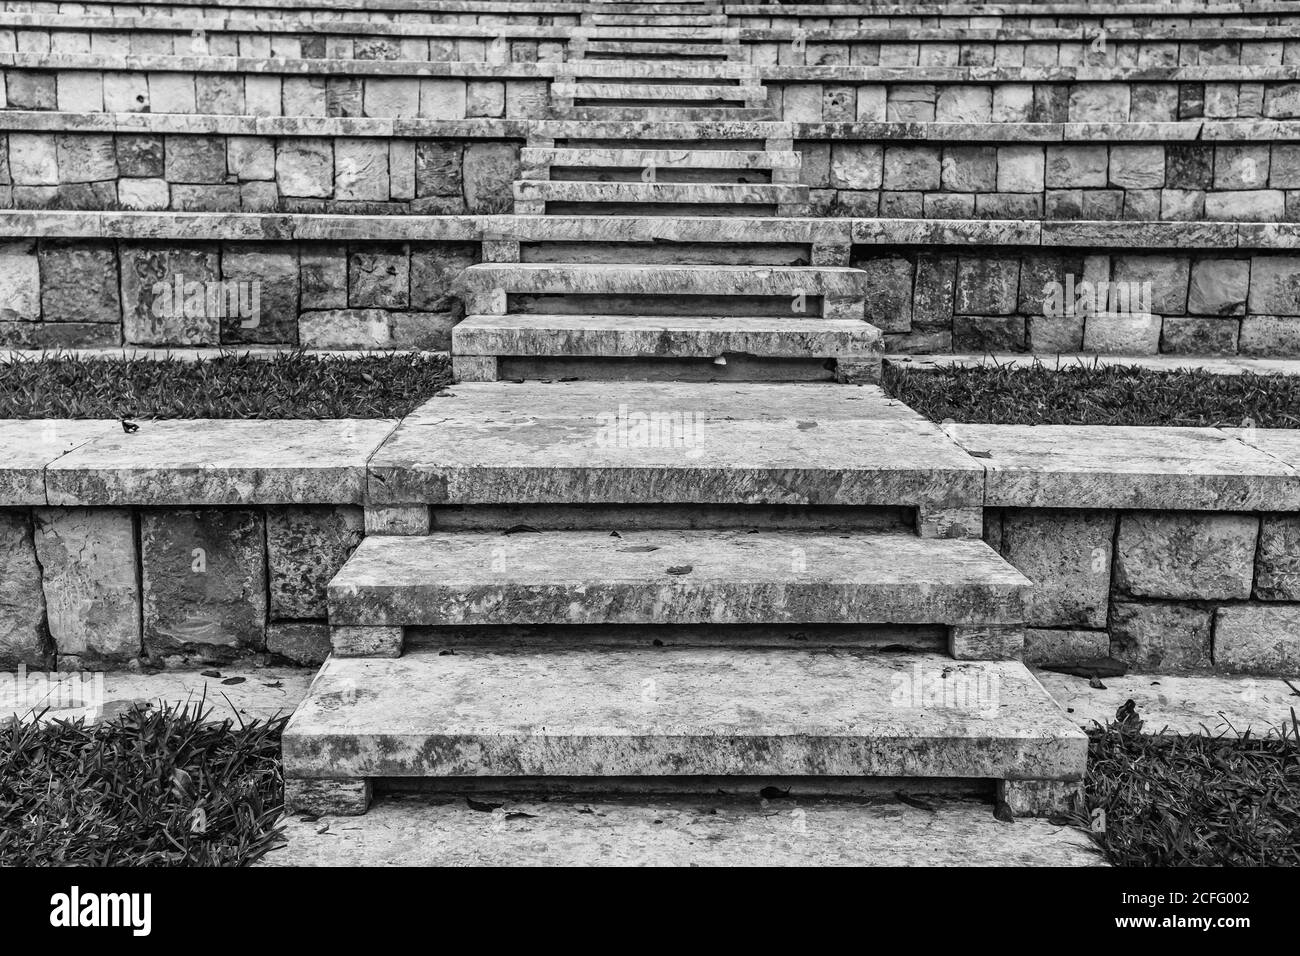 Black and white stone steps leading up among rows of tribunes in ancient temple in Mexico Stock Photo